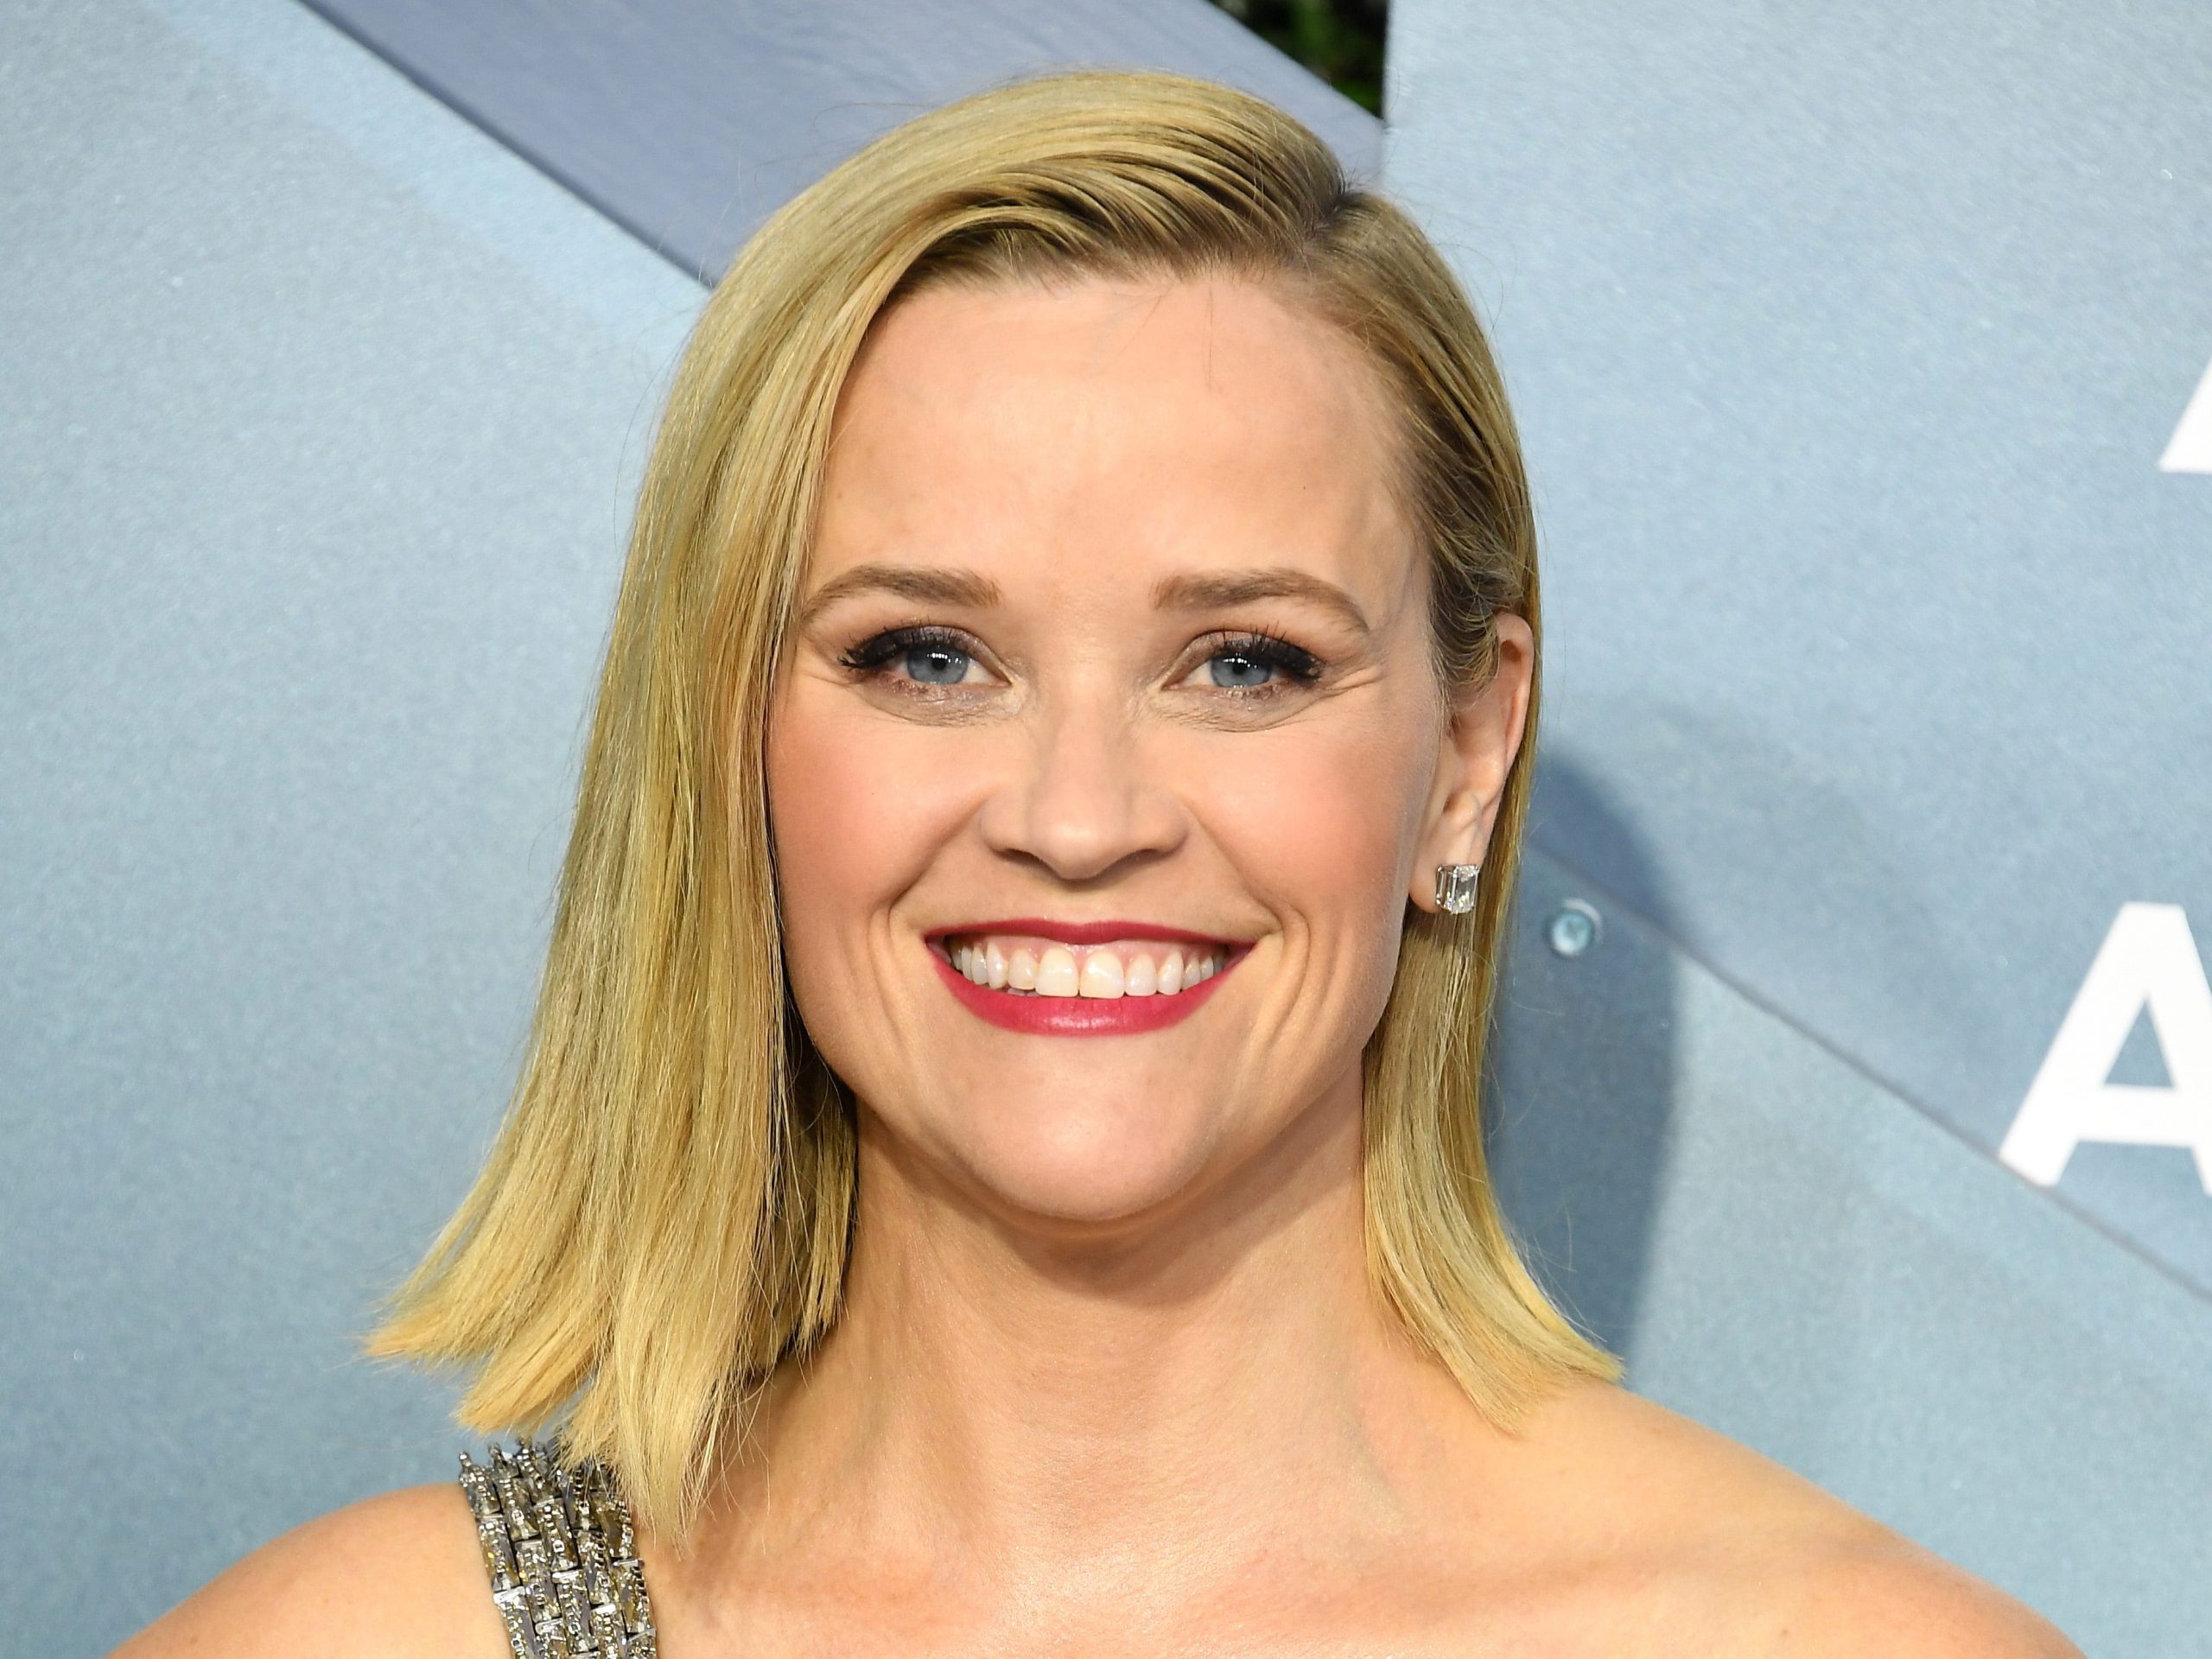 Reese Witherspoon at the 26th Annual Screen Actors Guild Awards at The Shrine Auditorium on January 19, 2020 in Los Angeles, California